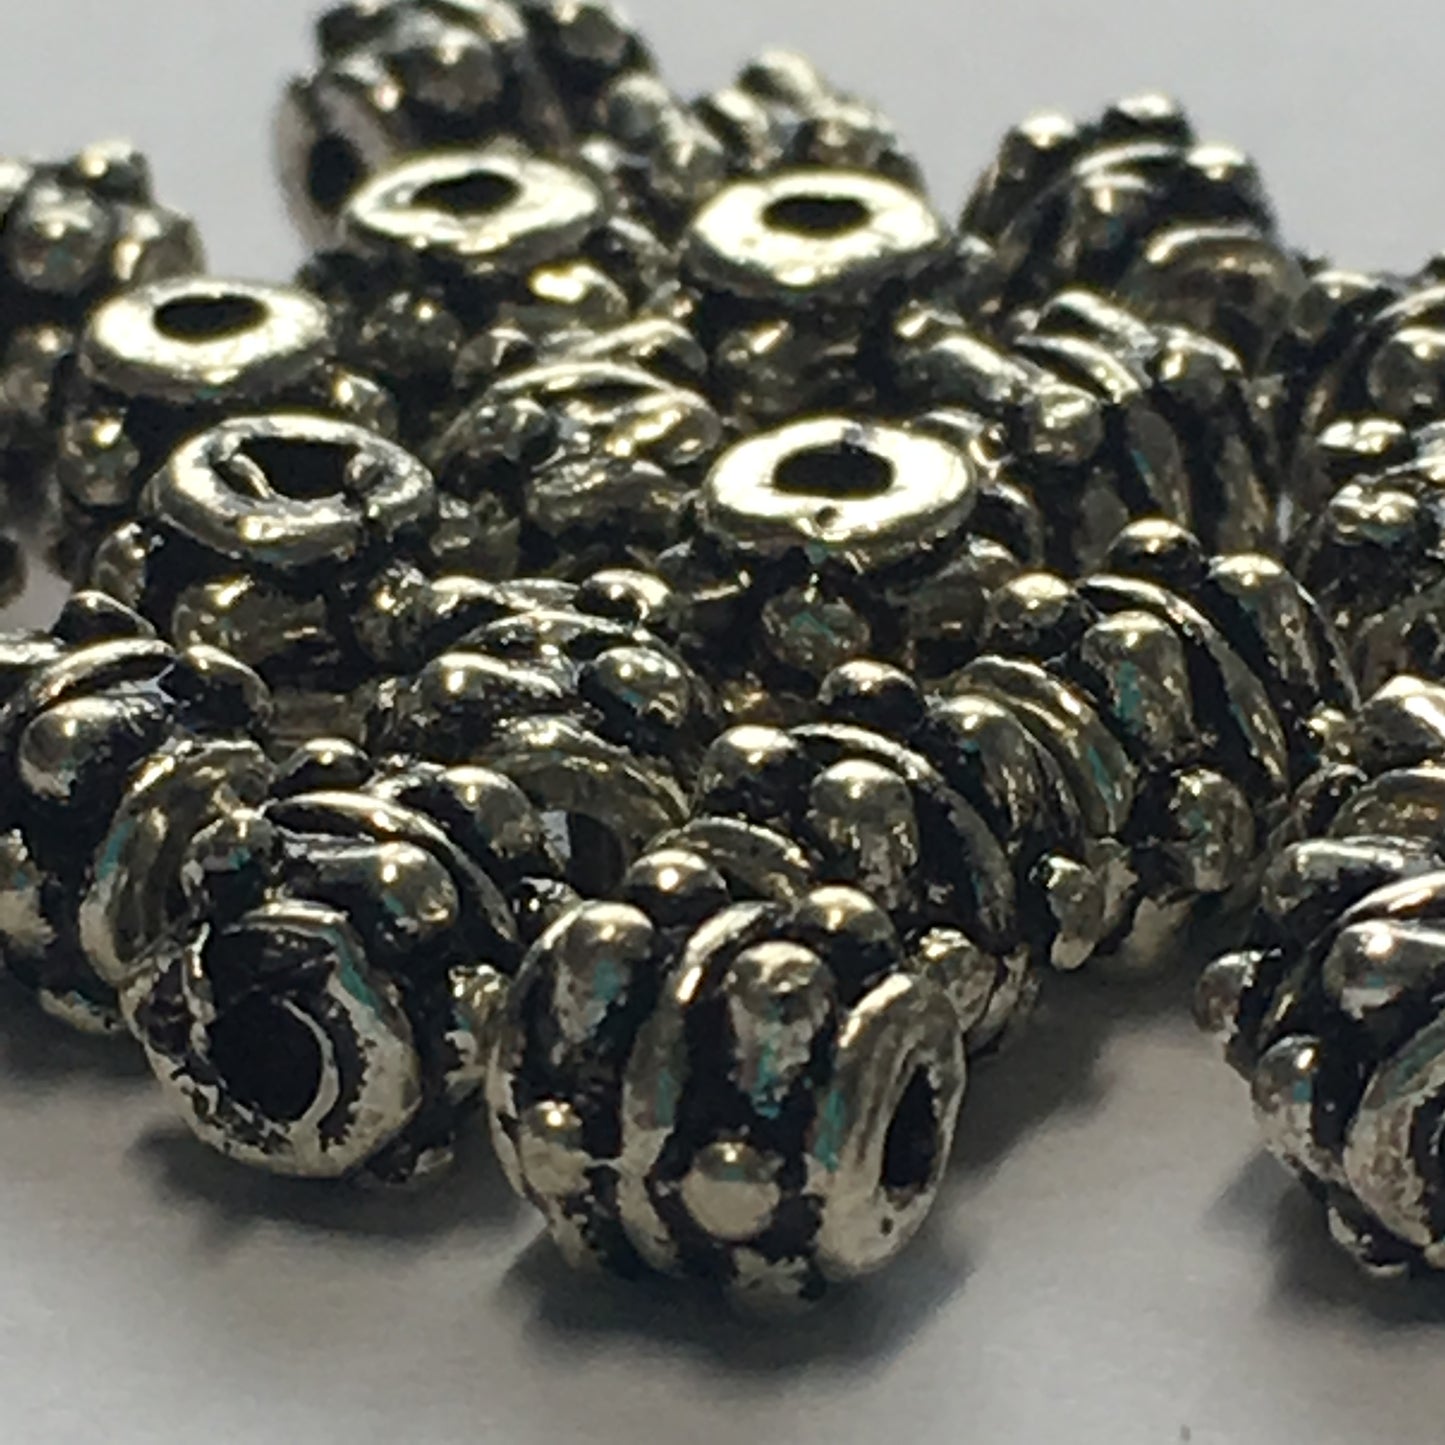 Antique Silver Bali Style Spacer Beads, 5 mm - 15 or 25 Beads